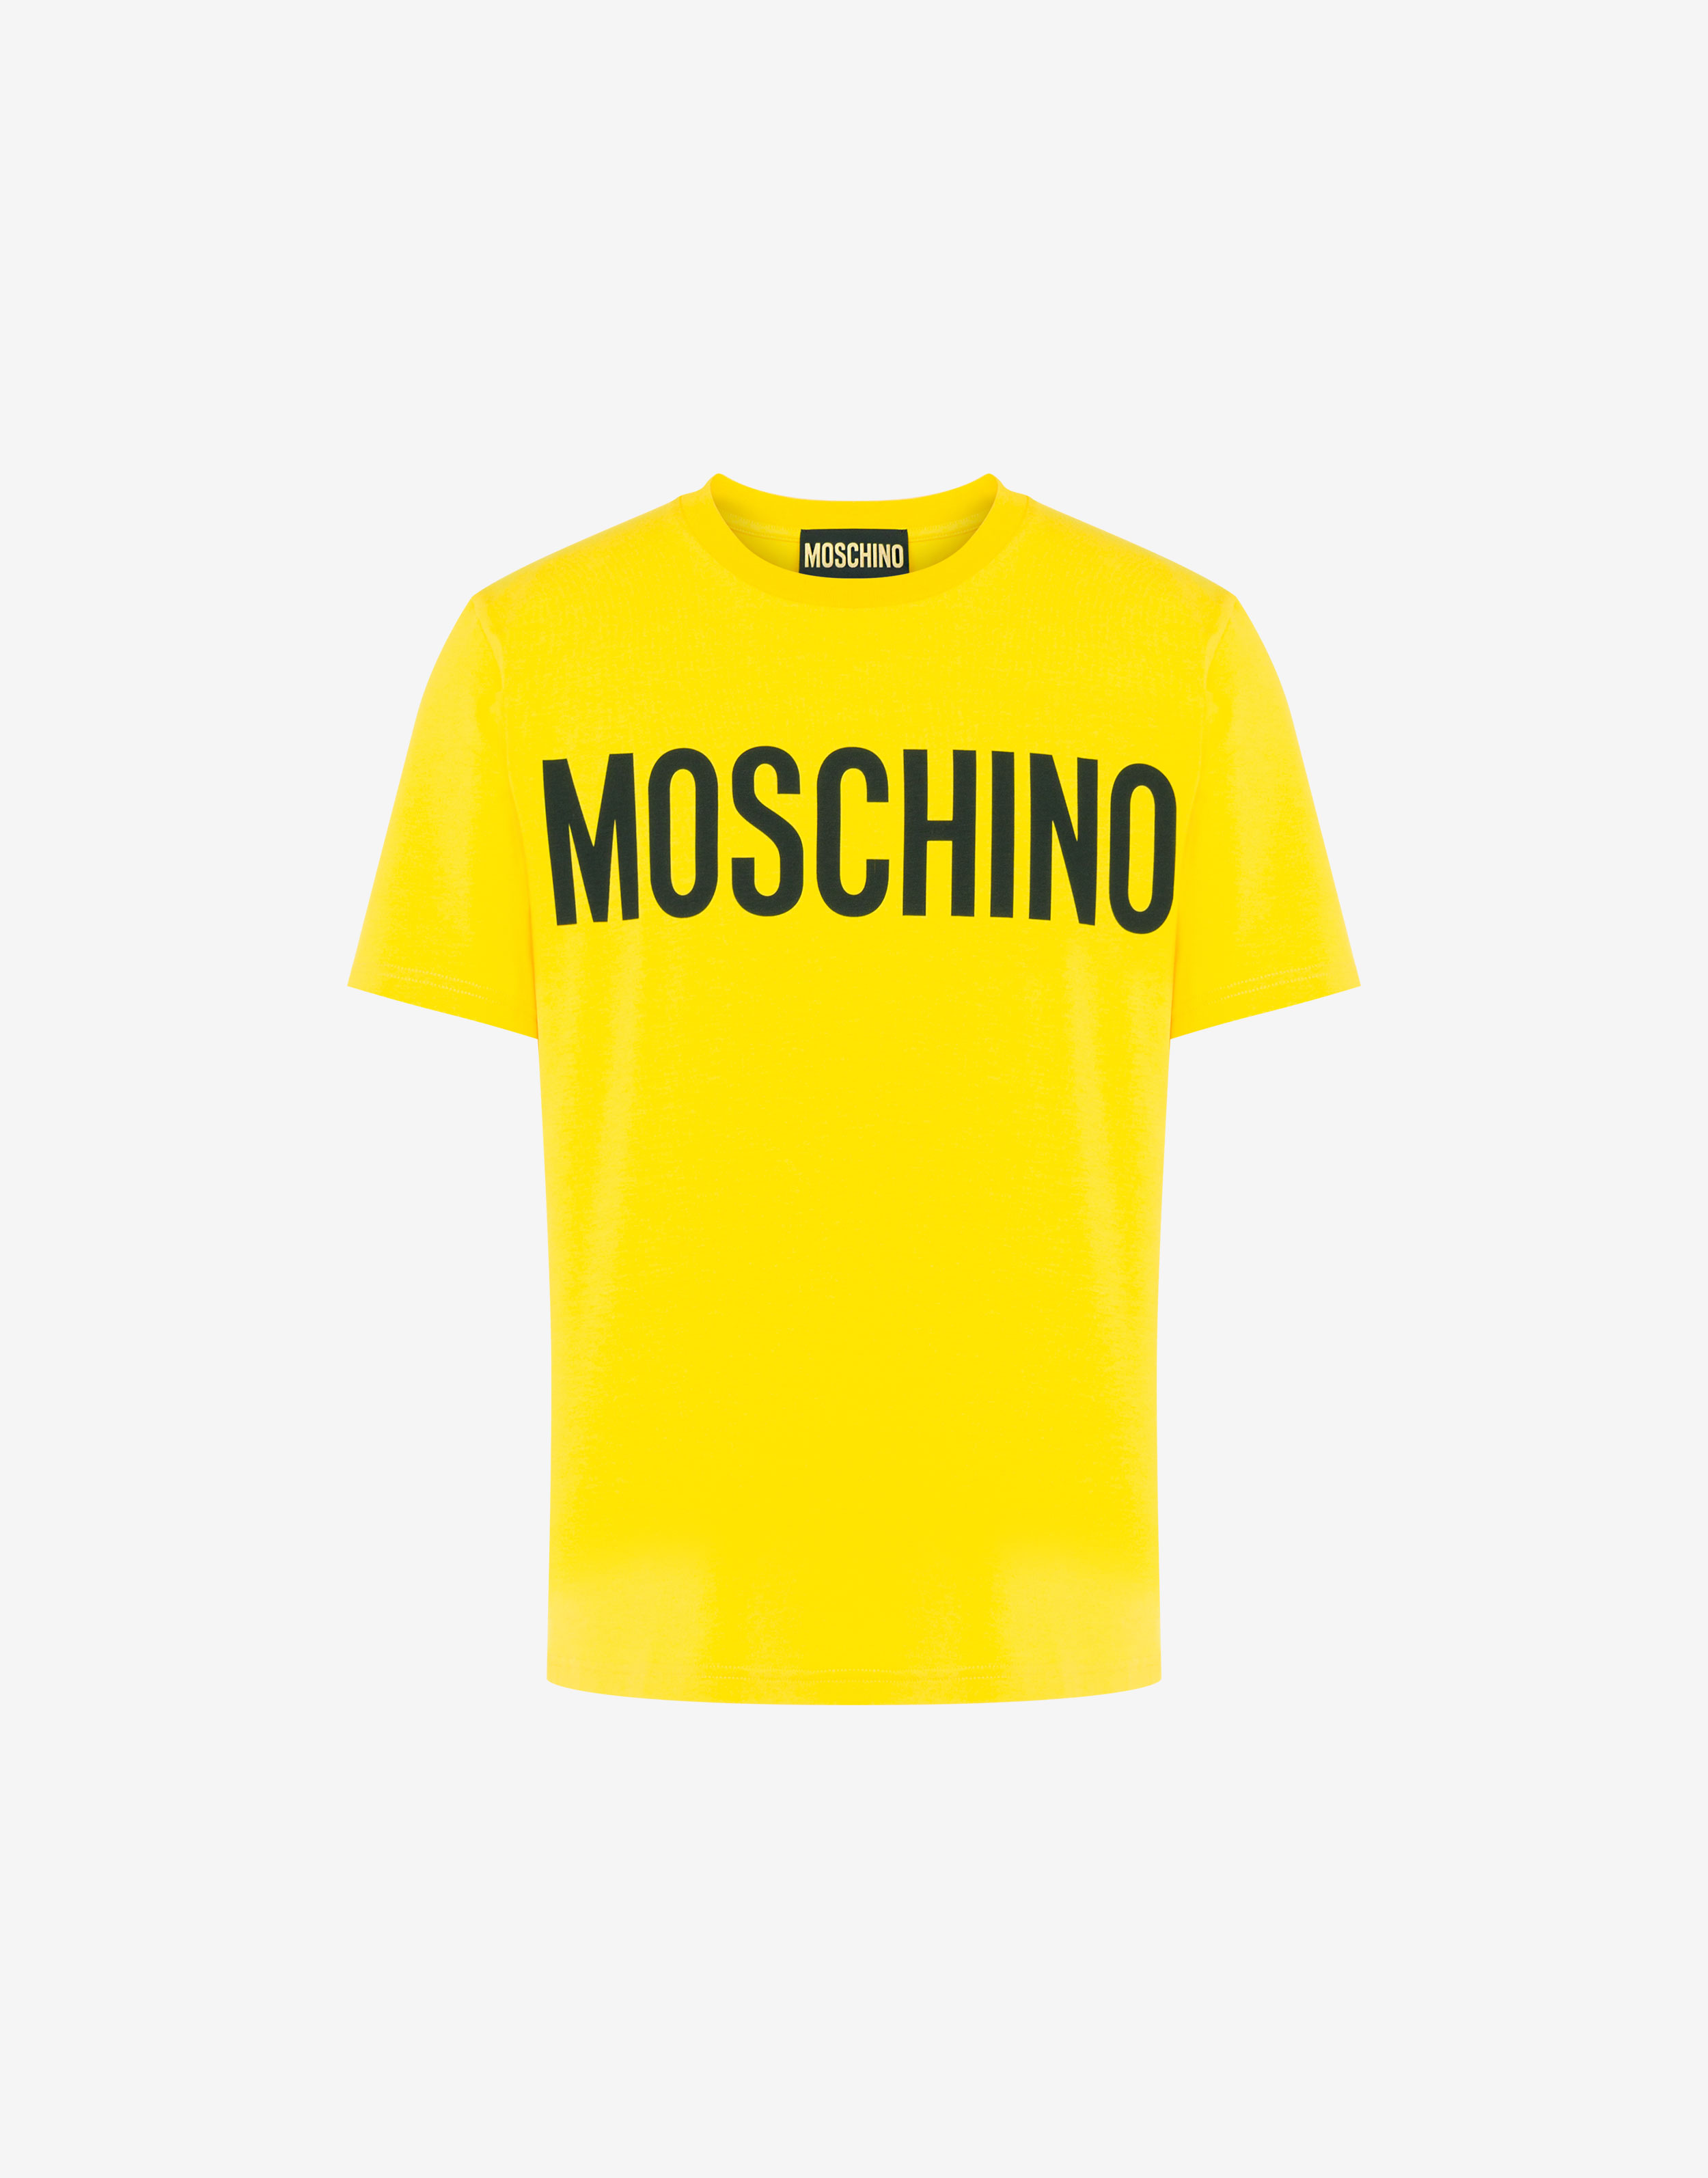 CLOTHING T-SHIRTS & VESTS MOSCHINO A0784 4410 0001